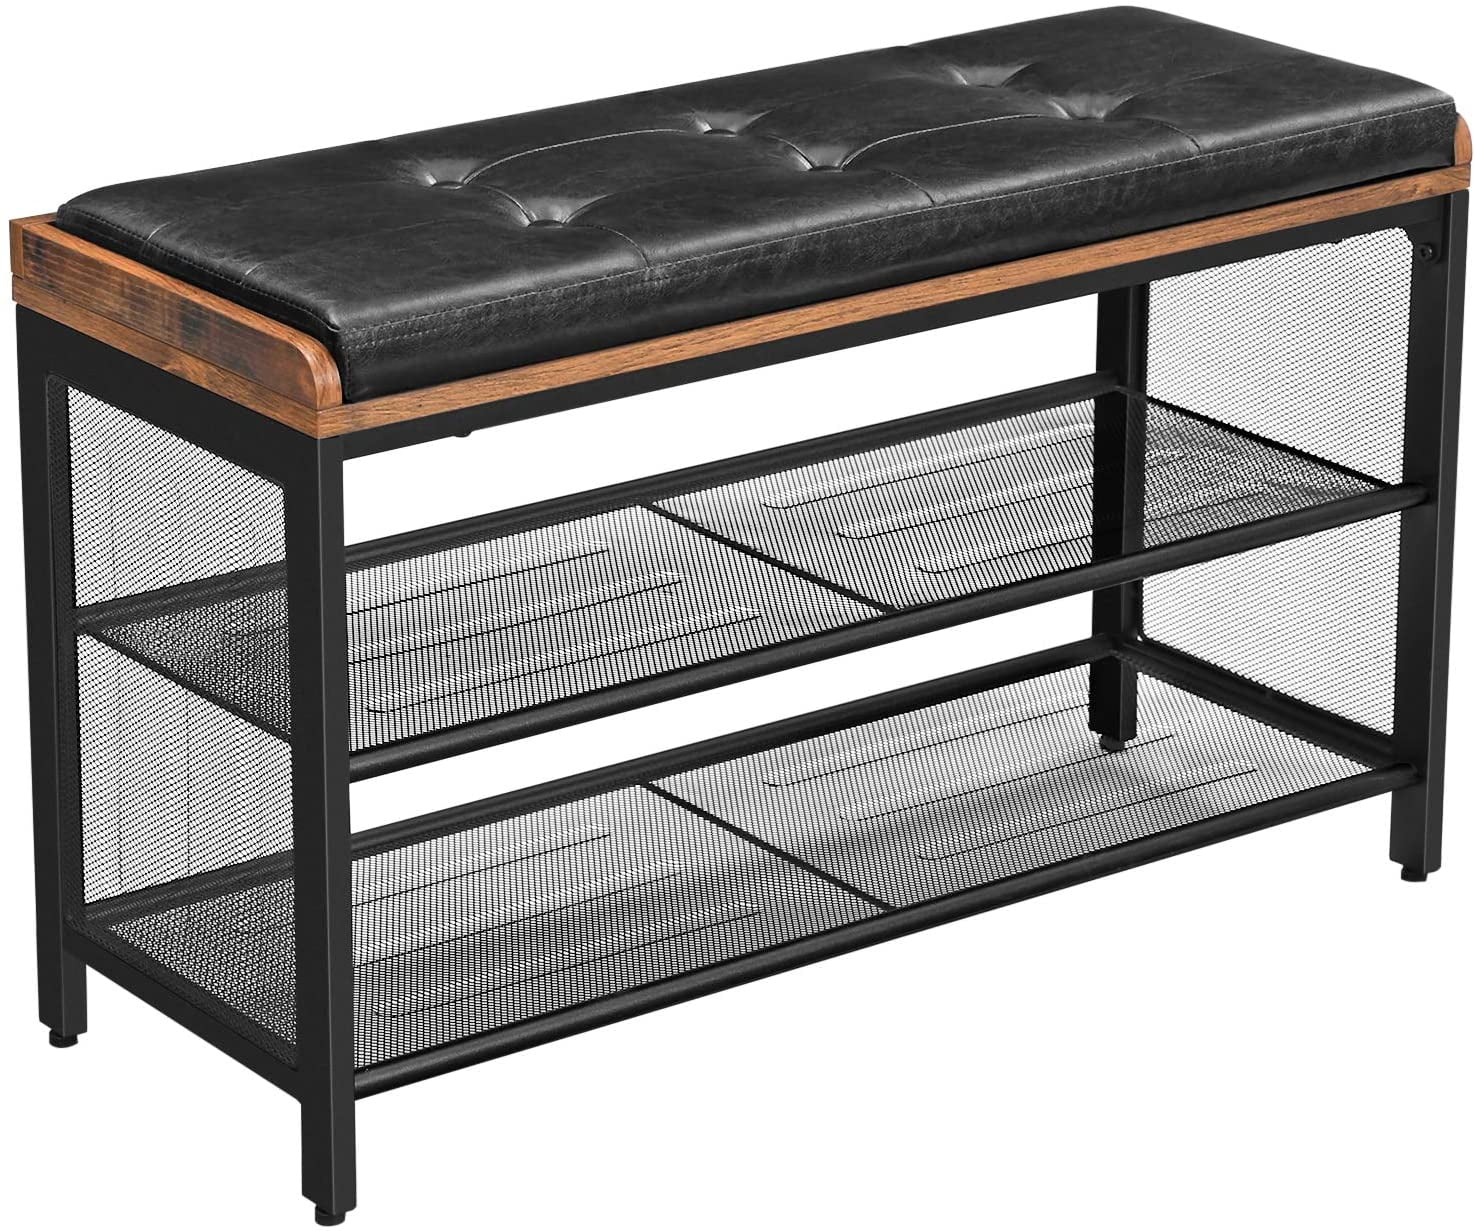 Vasagle Padded Storage Bench With Mesh, Vasagle Cubbie Shoe Cabinet Storage Bench With Cushion